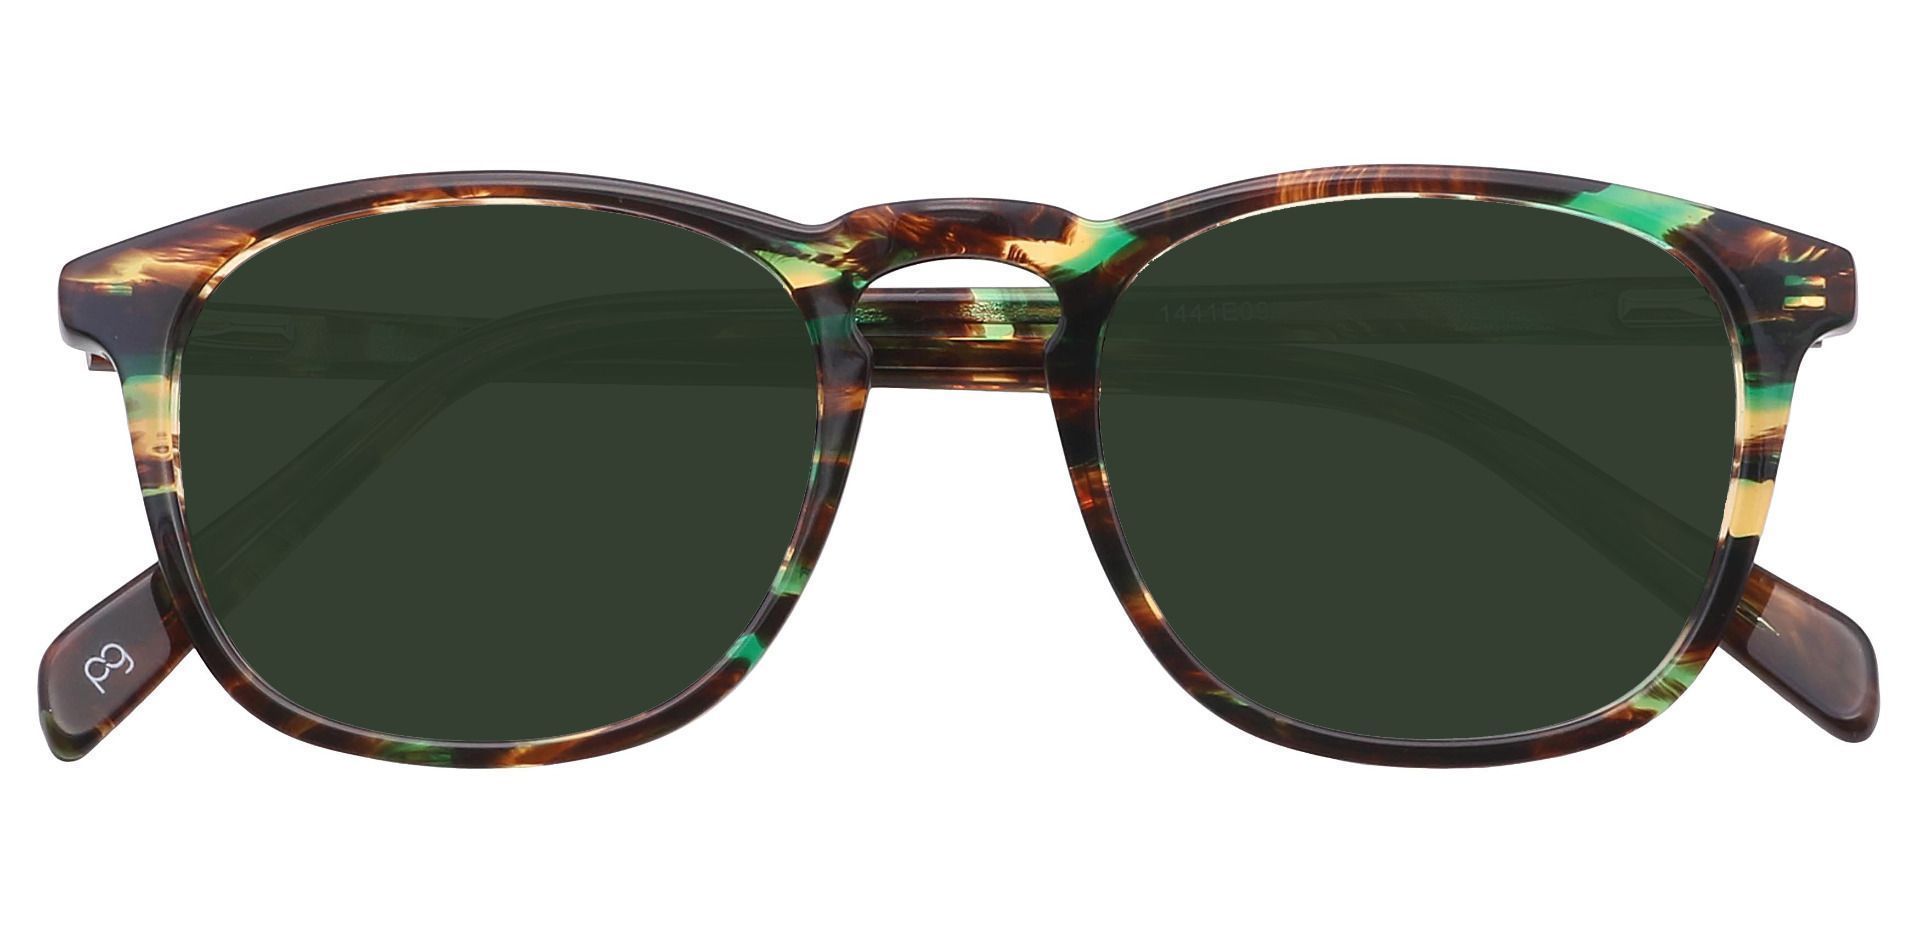 Venti Square Reading Sunglasses - Green Frame With Green Lenses